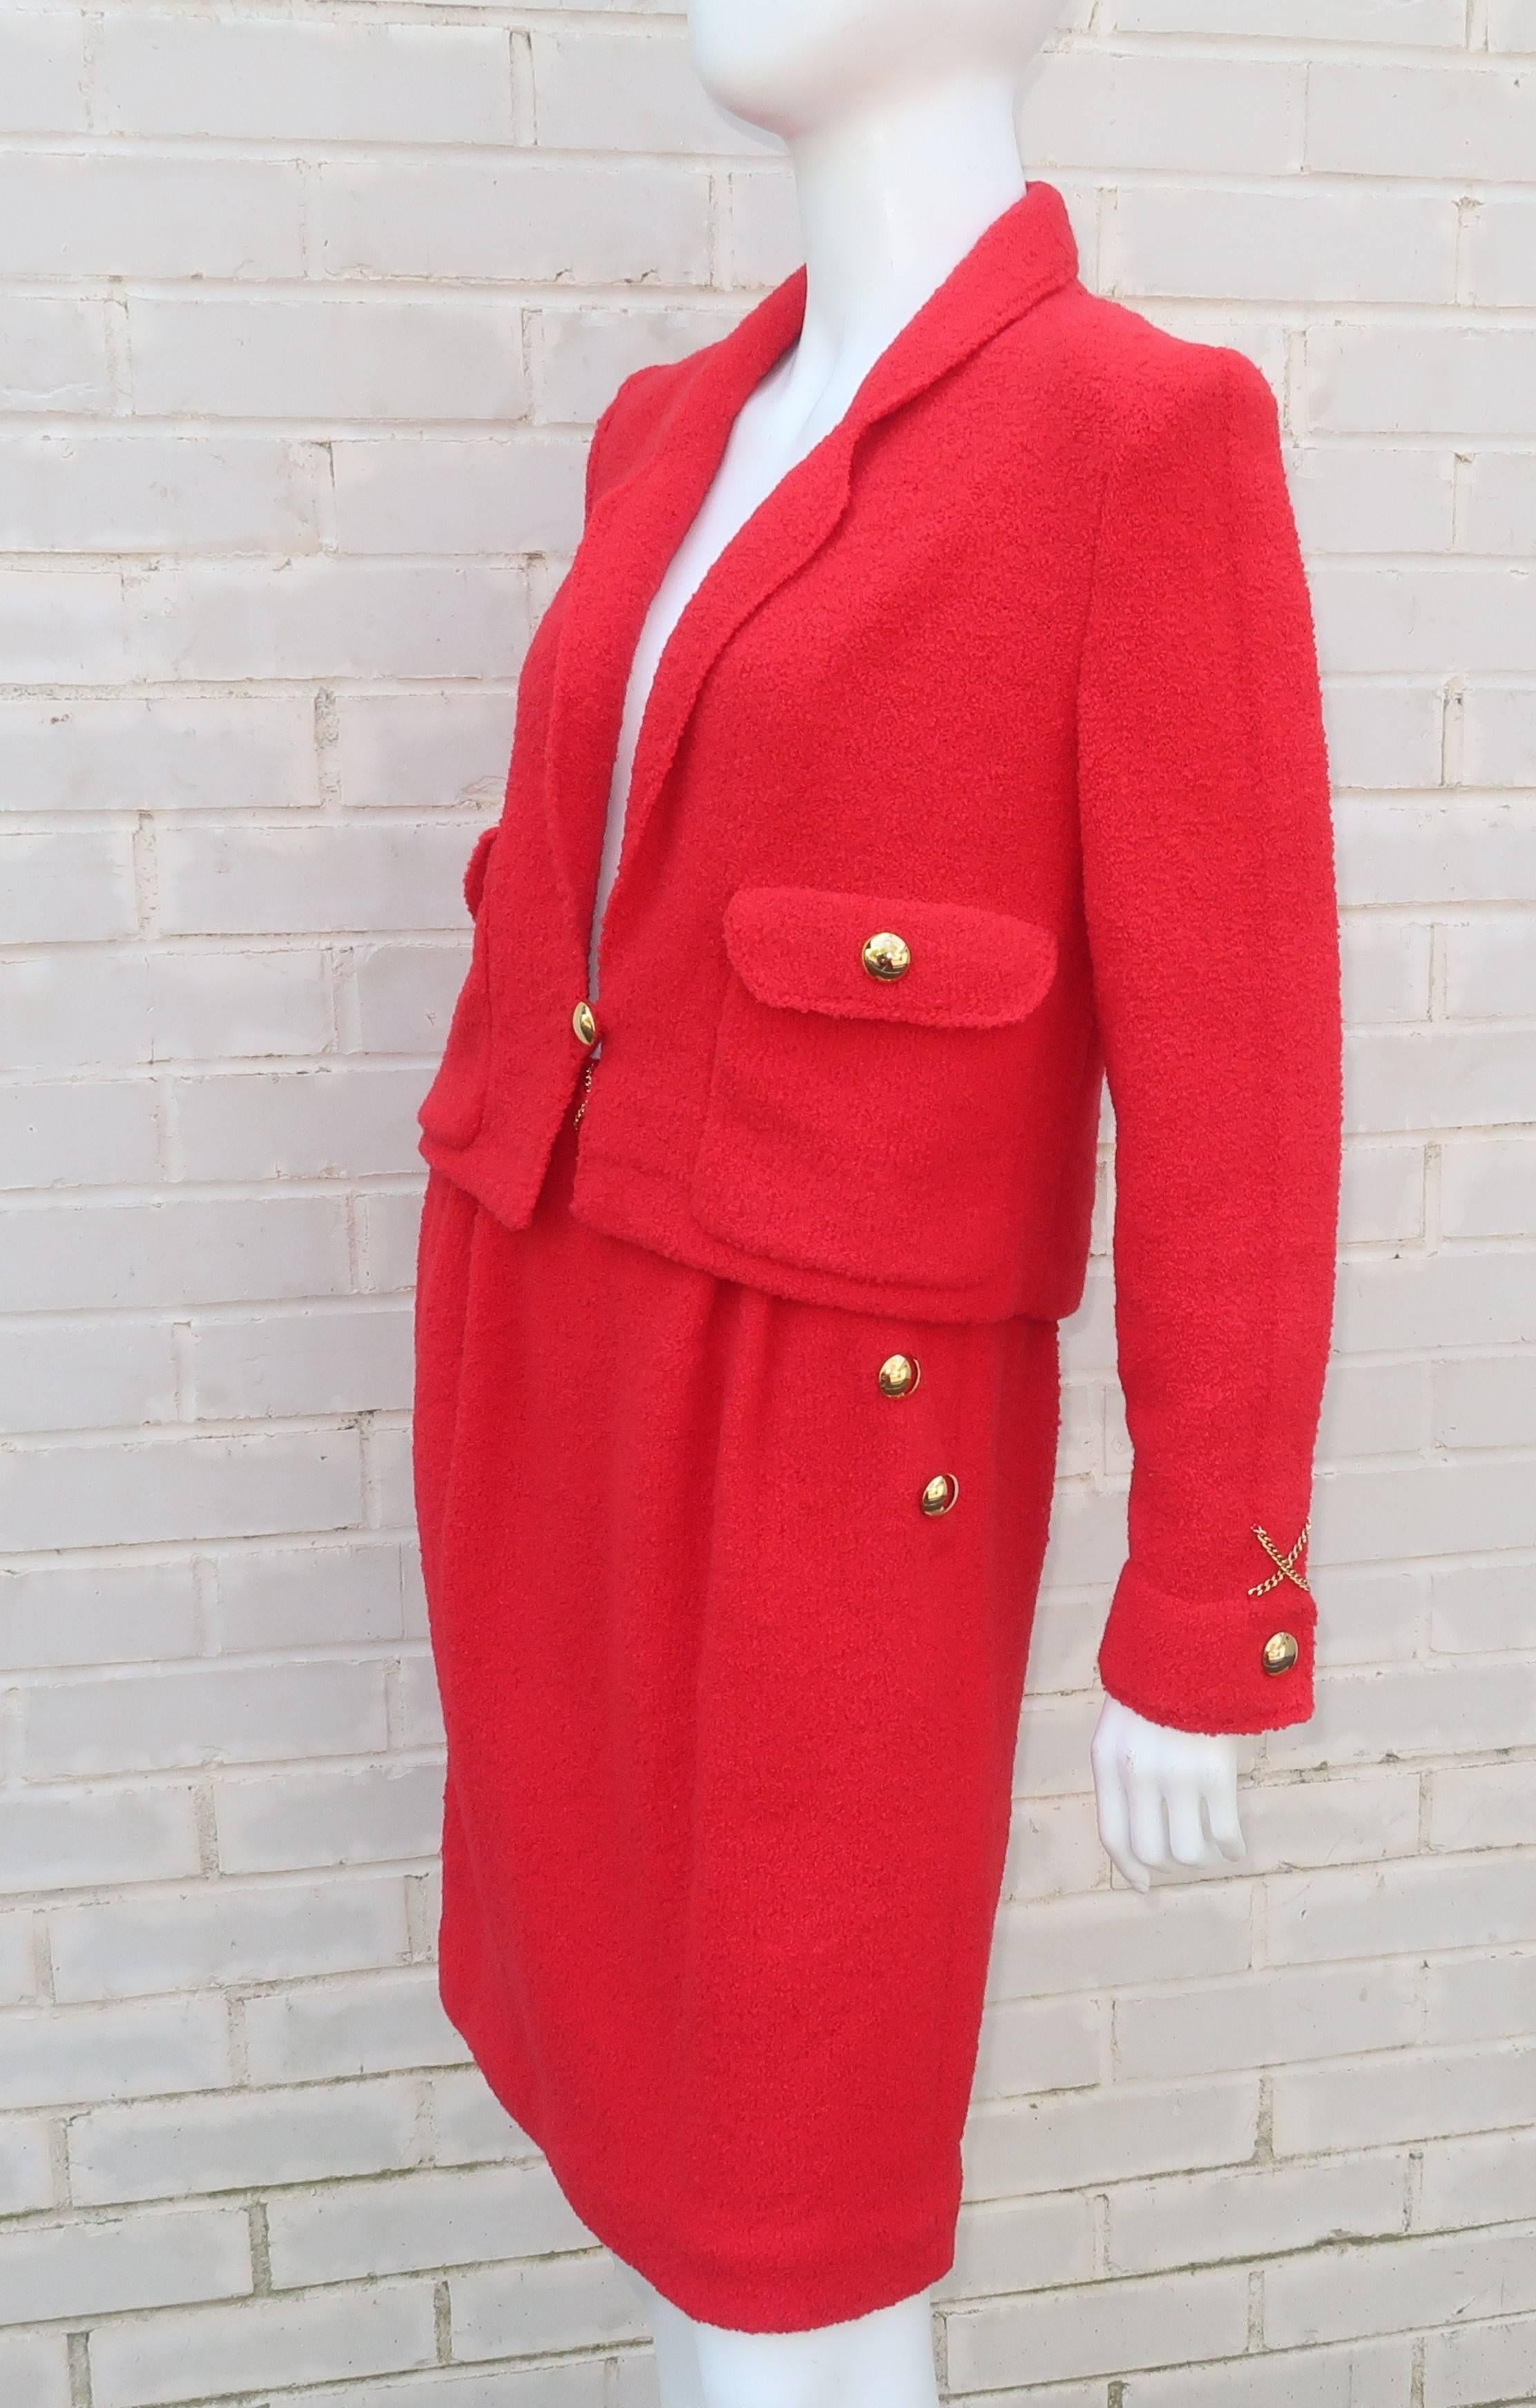 Adolfo Red Boucle Knit Skirt Suit With Chain Details, 1980s 2